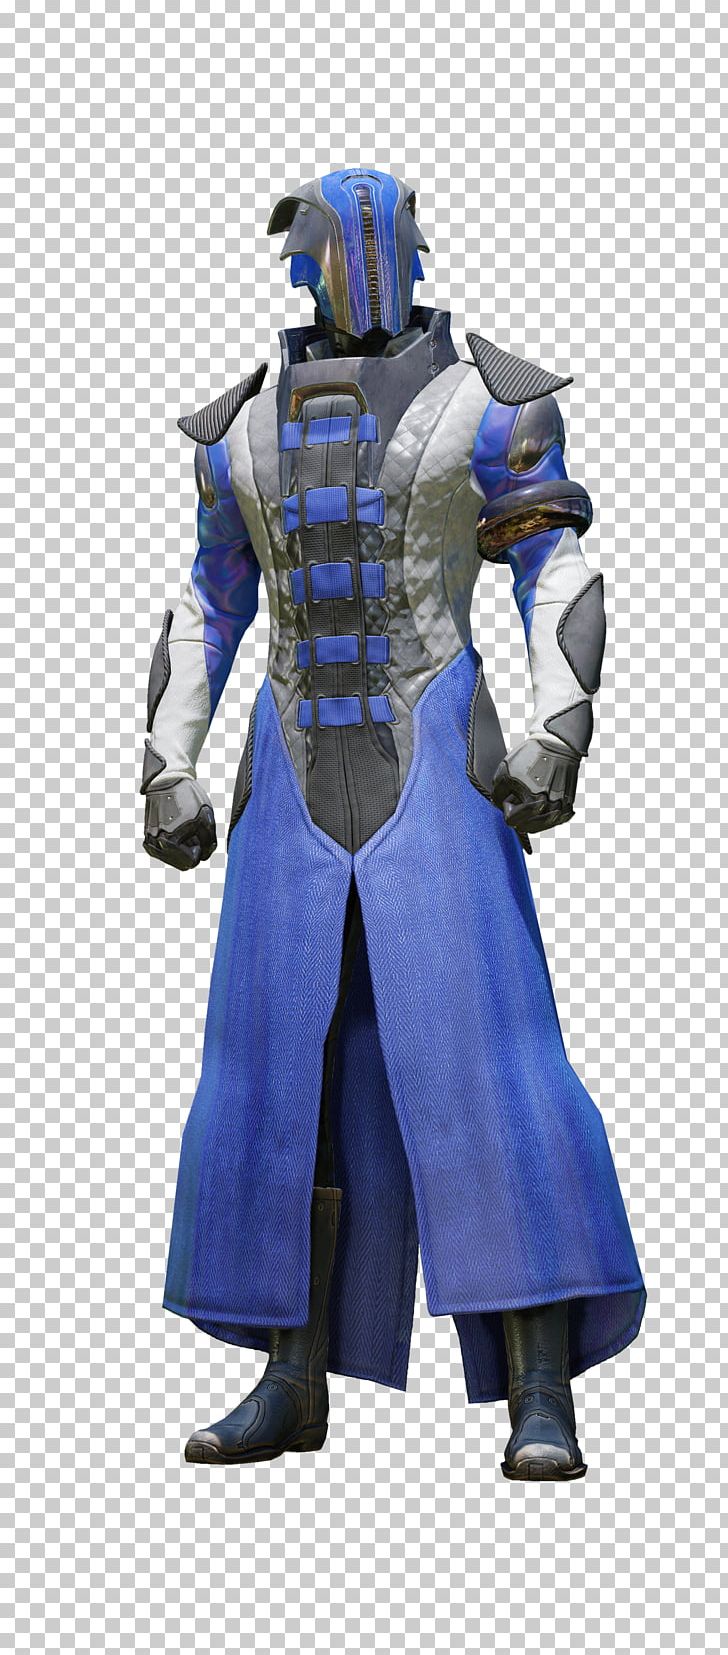 Destiny 2 PlayStation 4 Bungie Able Content PNG, Clipart, Armour, Bungie, Costume, Costume Design, Destiny Free PNG Download